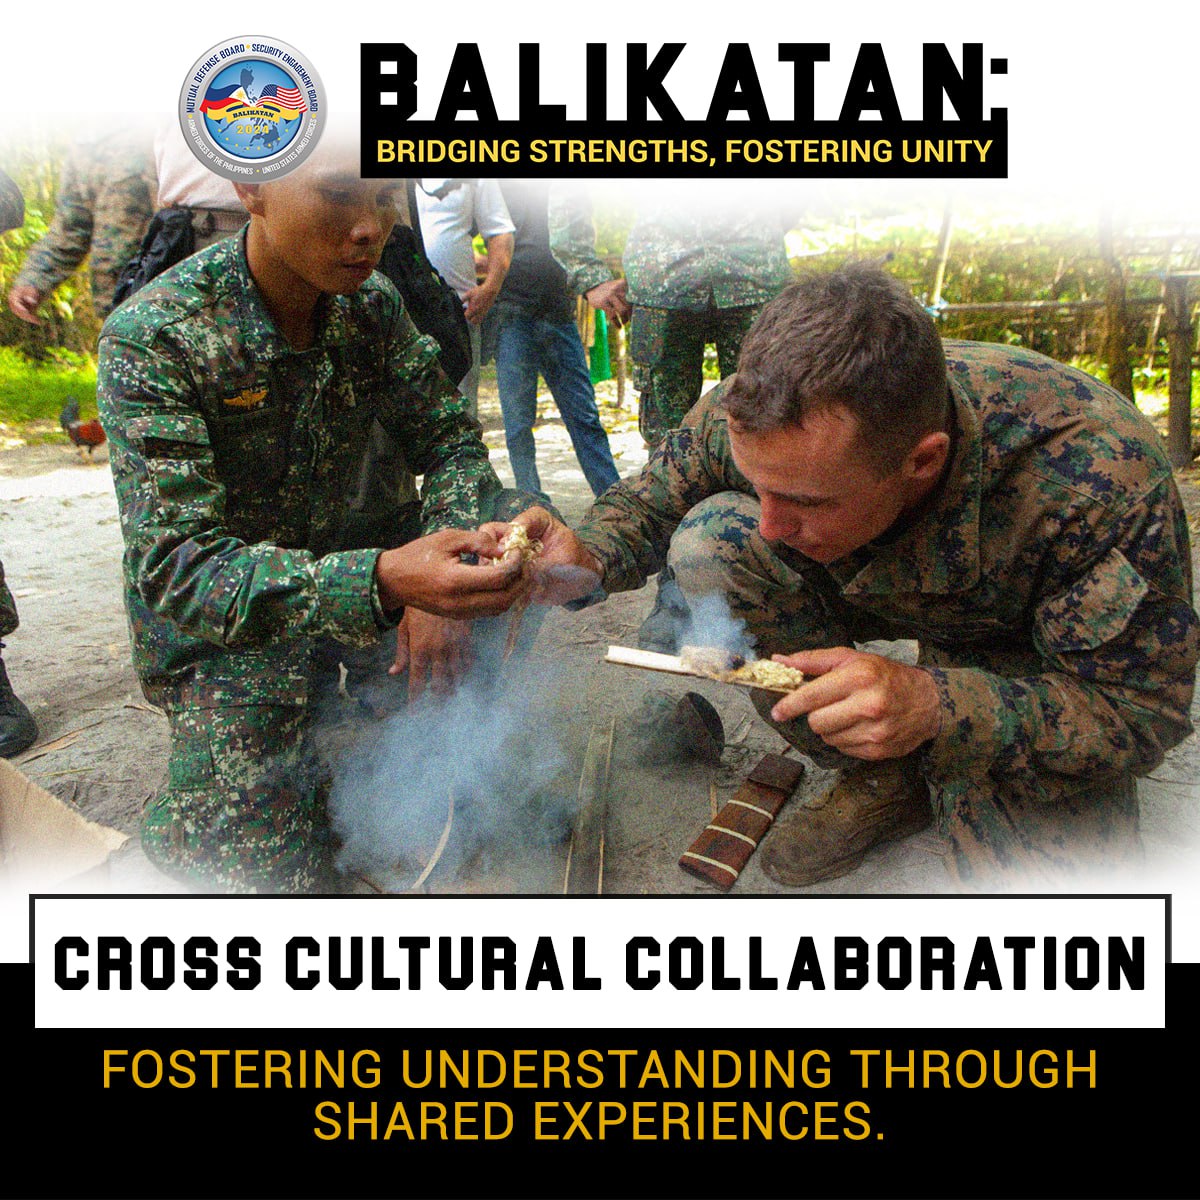 CROSS CULTURAL COLLABORATION | In addition to enhancing capabilities jointly, the Balikatan Exercises also promote mutual understanding through shared experiences.

#Balikatan2024 
#StrengthInUnity 
#AlliesForPeace
#AFPyoucanTRUST
#OneAFPOnePhilippines
#StrongAFPStrongPhilippines